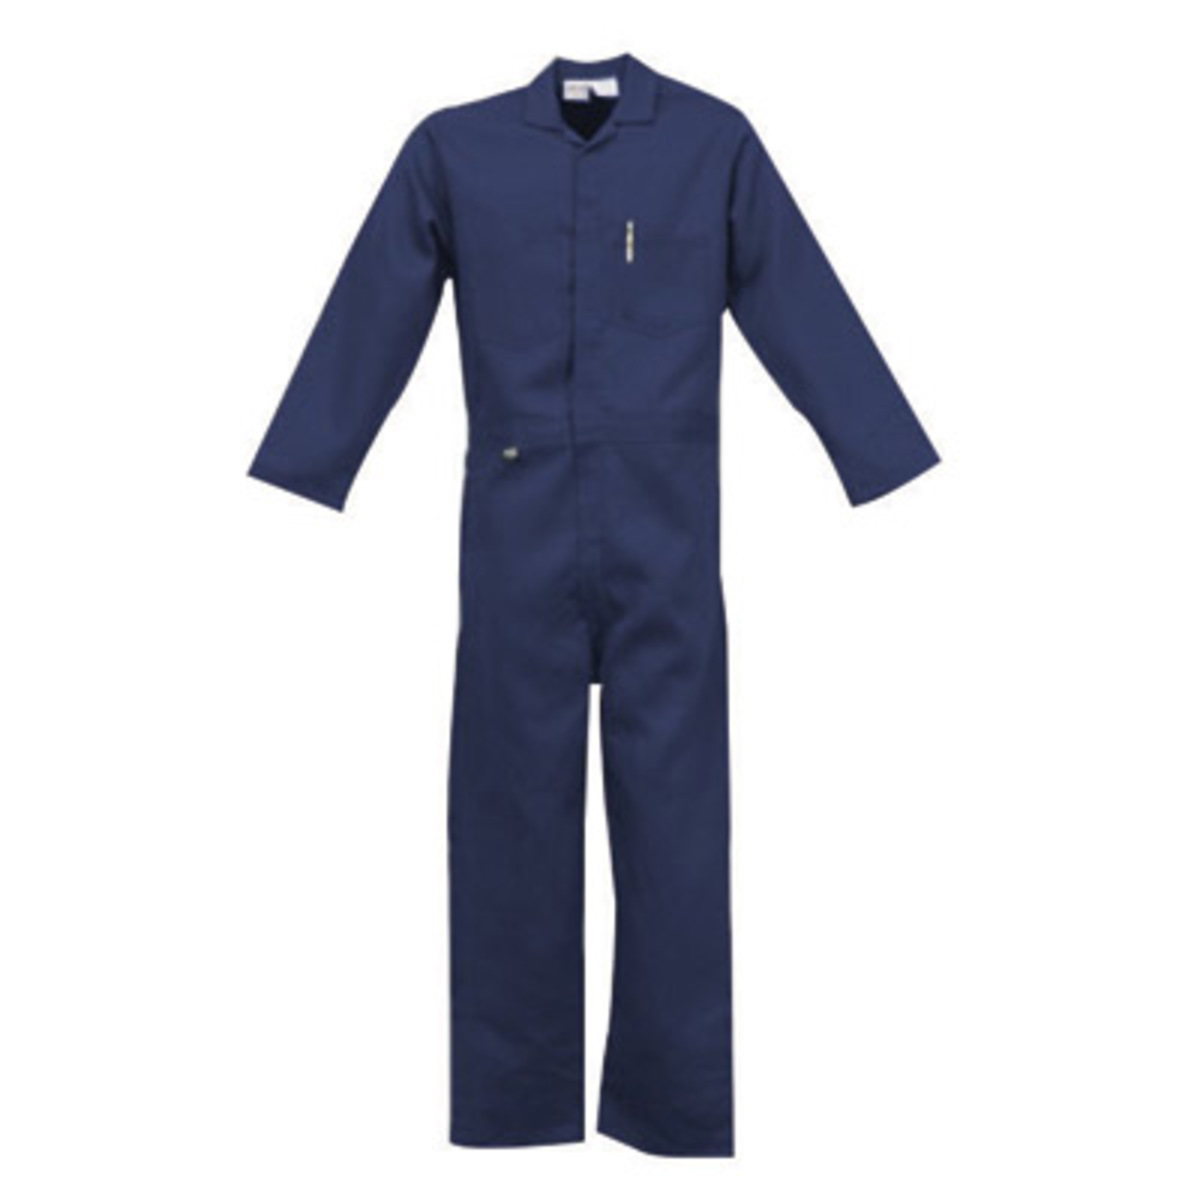 Stanco Safety Products™ Small Navy Blue Indura® UltraSoft® Arc Rated Flame Resistant Coveralls With Front Zipper Closure